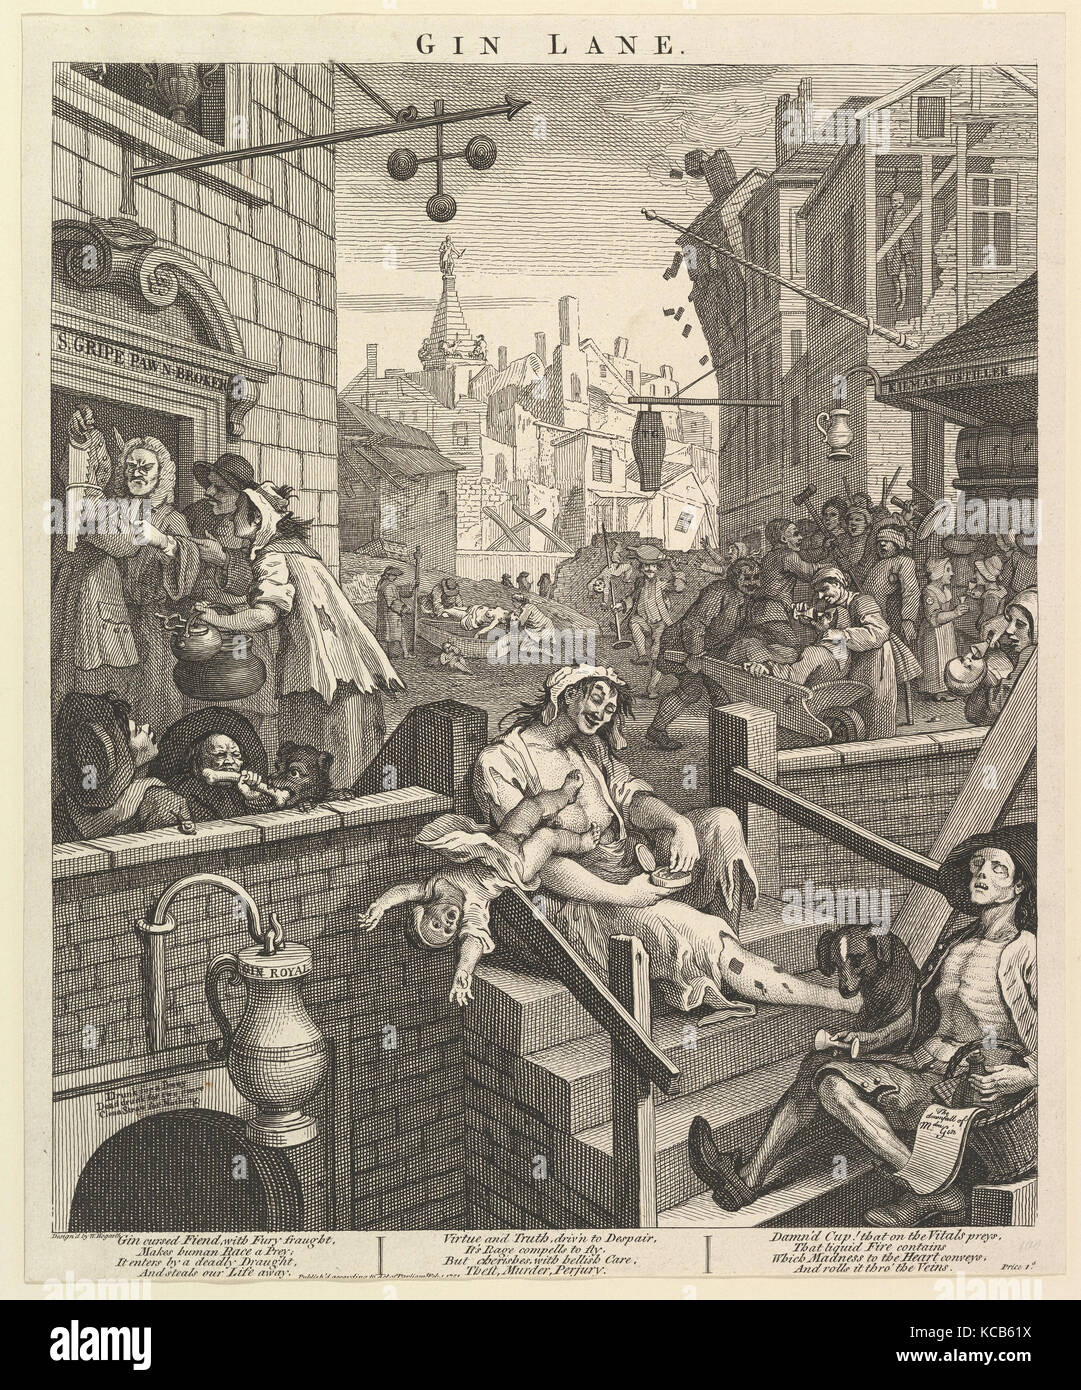 Gin Lane, February 1, 1751, Etching and engraving; third state of three, sheet: 15 1/16 x 12 1/2 in. (38.3 x 31.7 cm), Prints Stock Photo